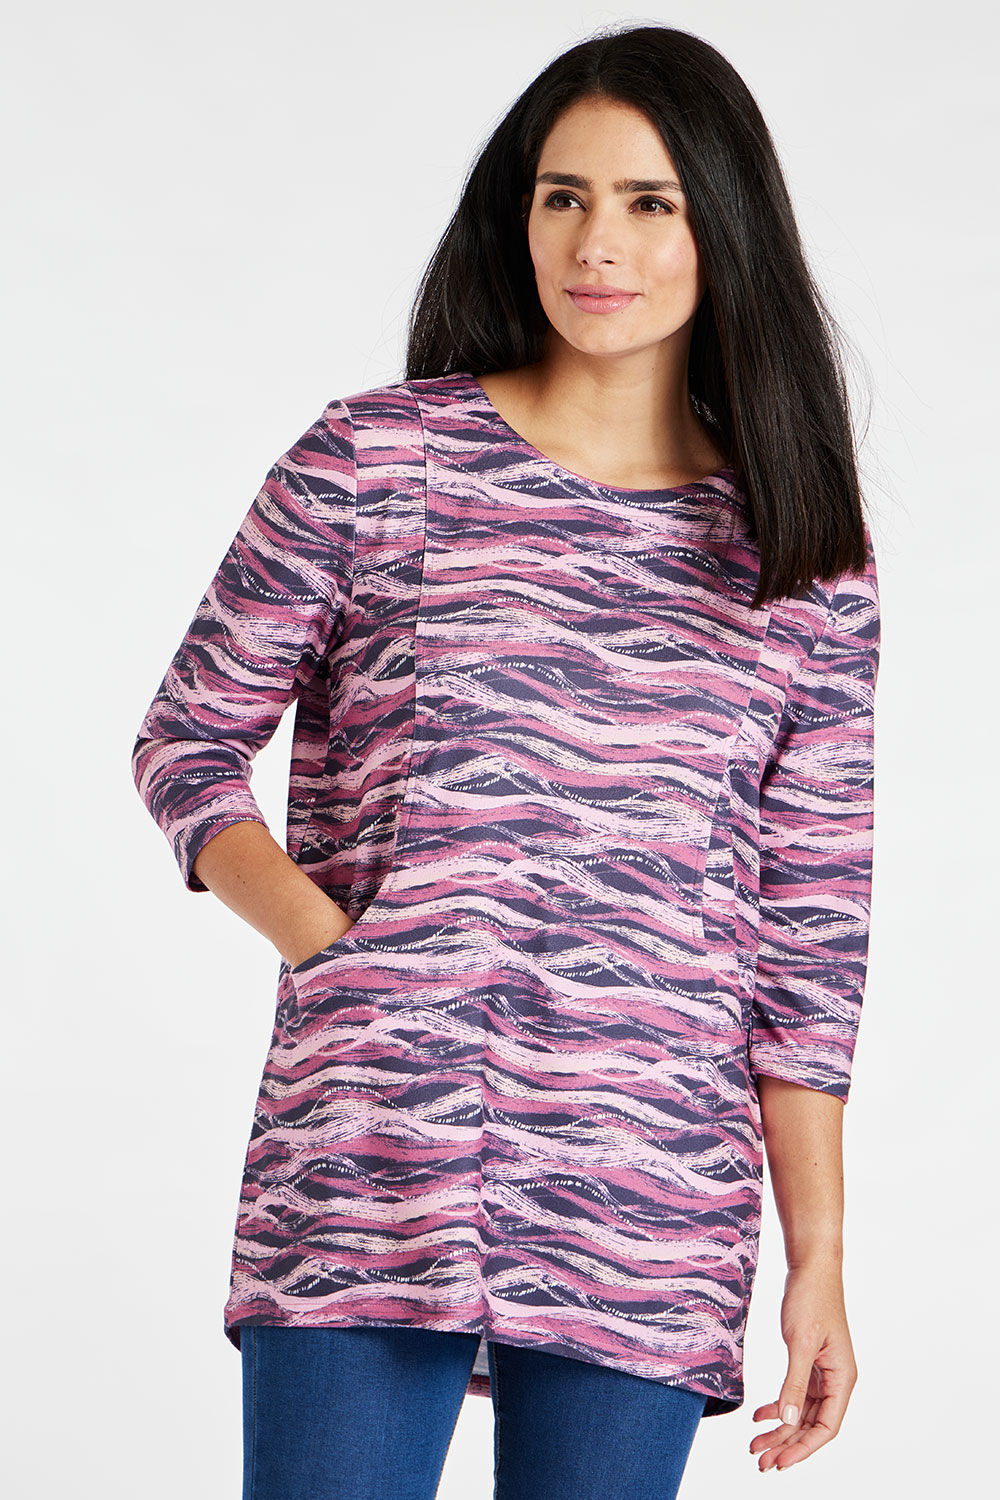 Bonmarche Women’s Pink Striped 3/4 Sleeve Wavy Print Soft Touch Tunic with Pocket Detail, Size: 12